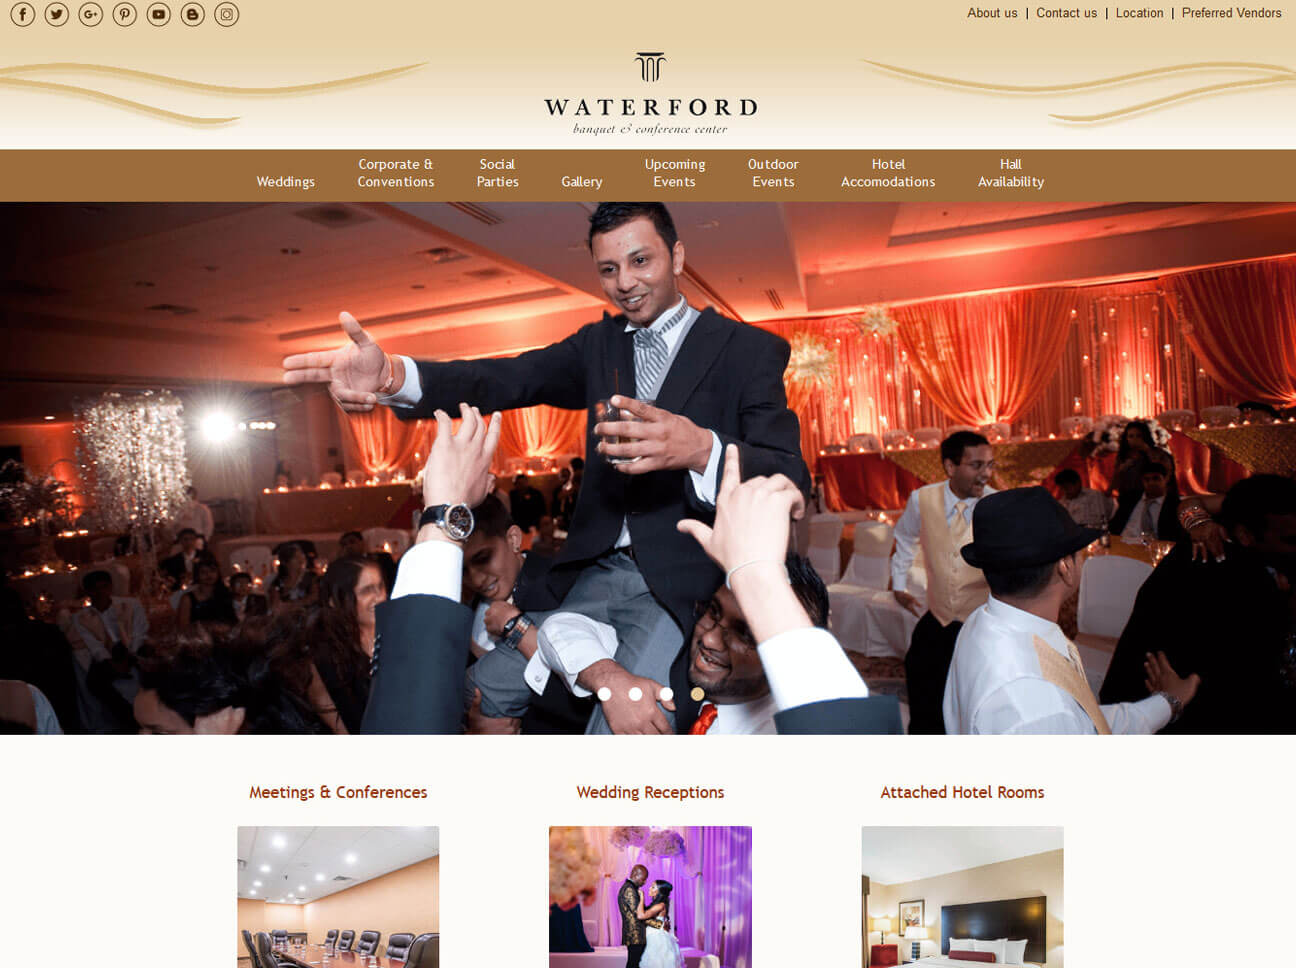 Waterford Banquet & Conference Center